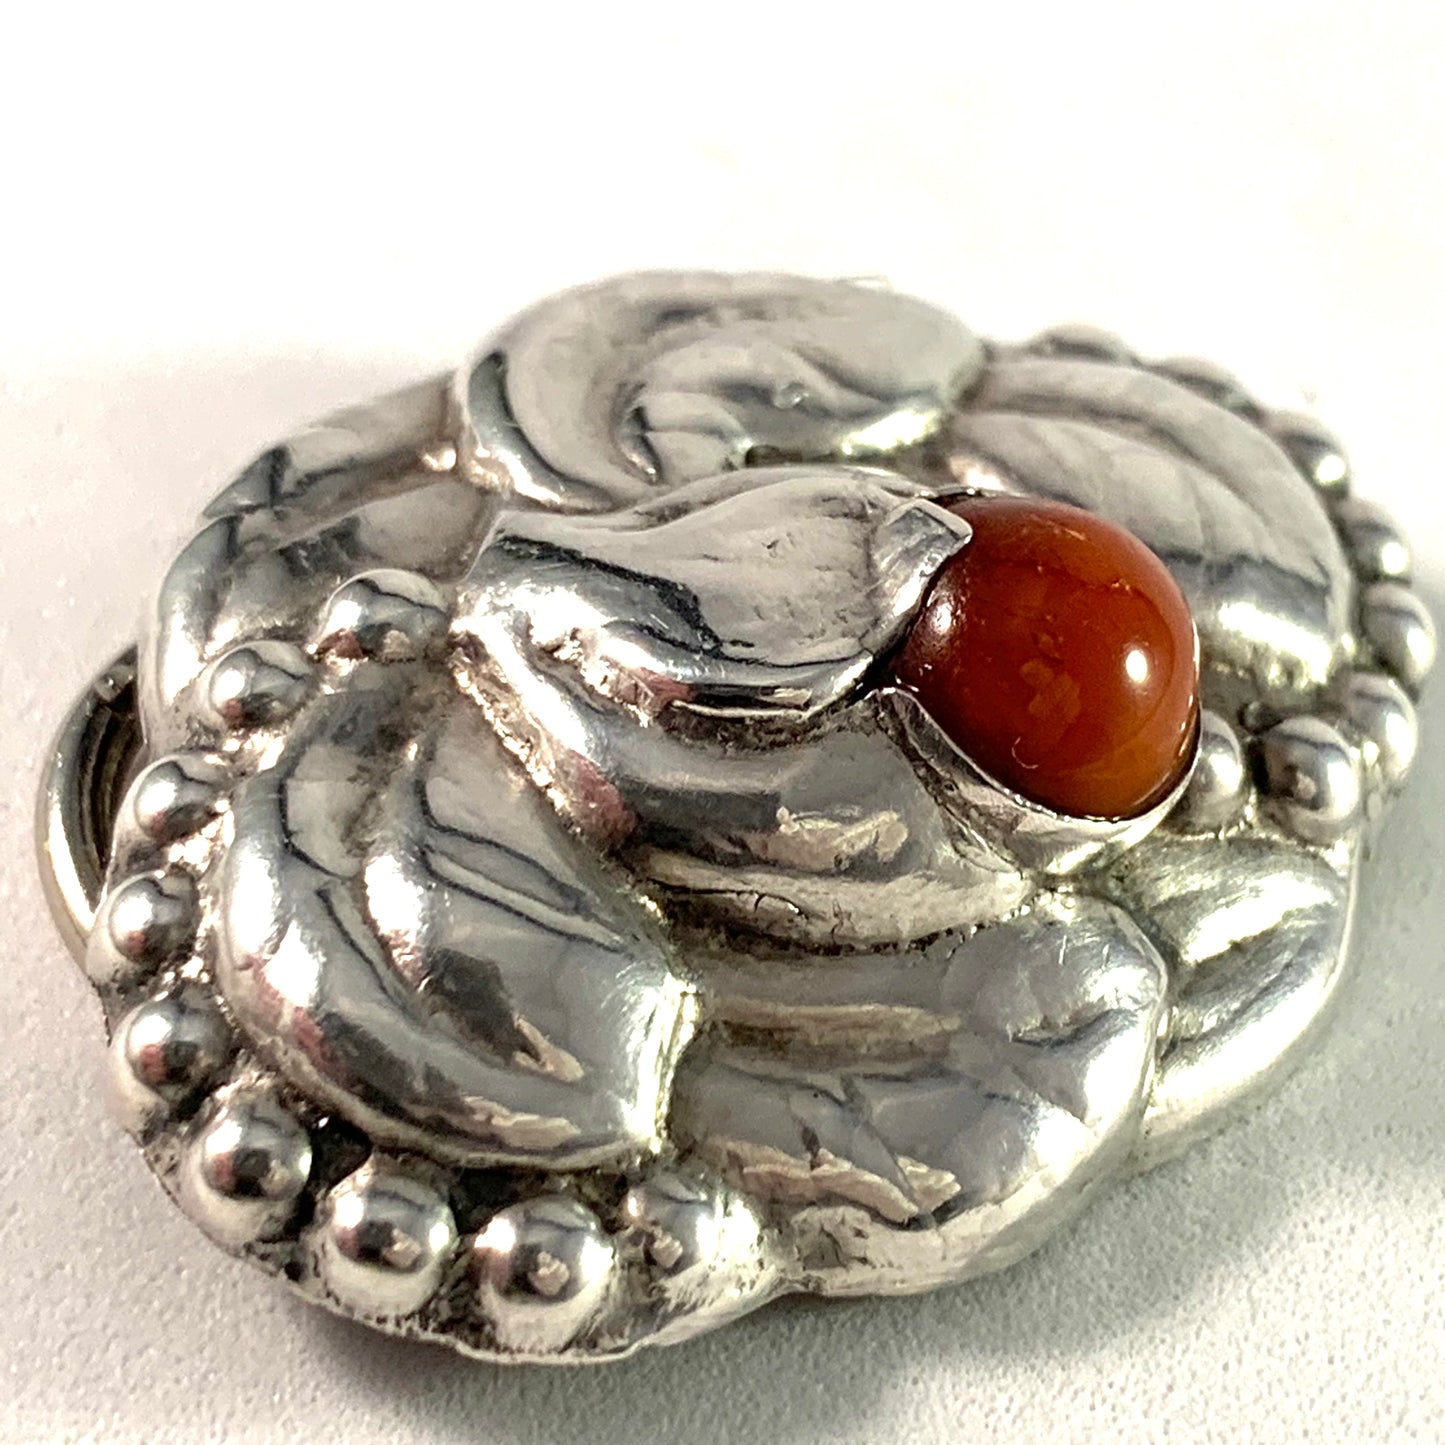 Denmark 1910s Art Nouveau Silver Amber Brooch Converted To Scarf Clip.